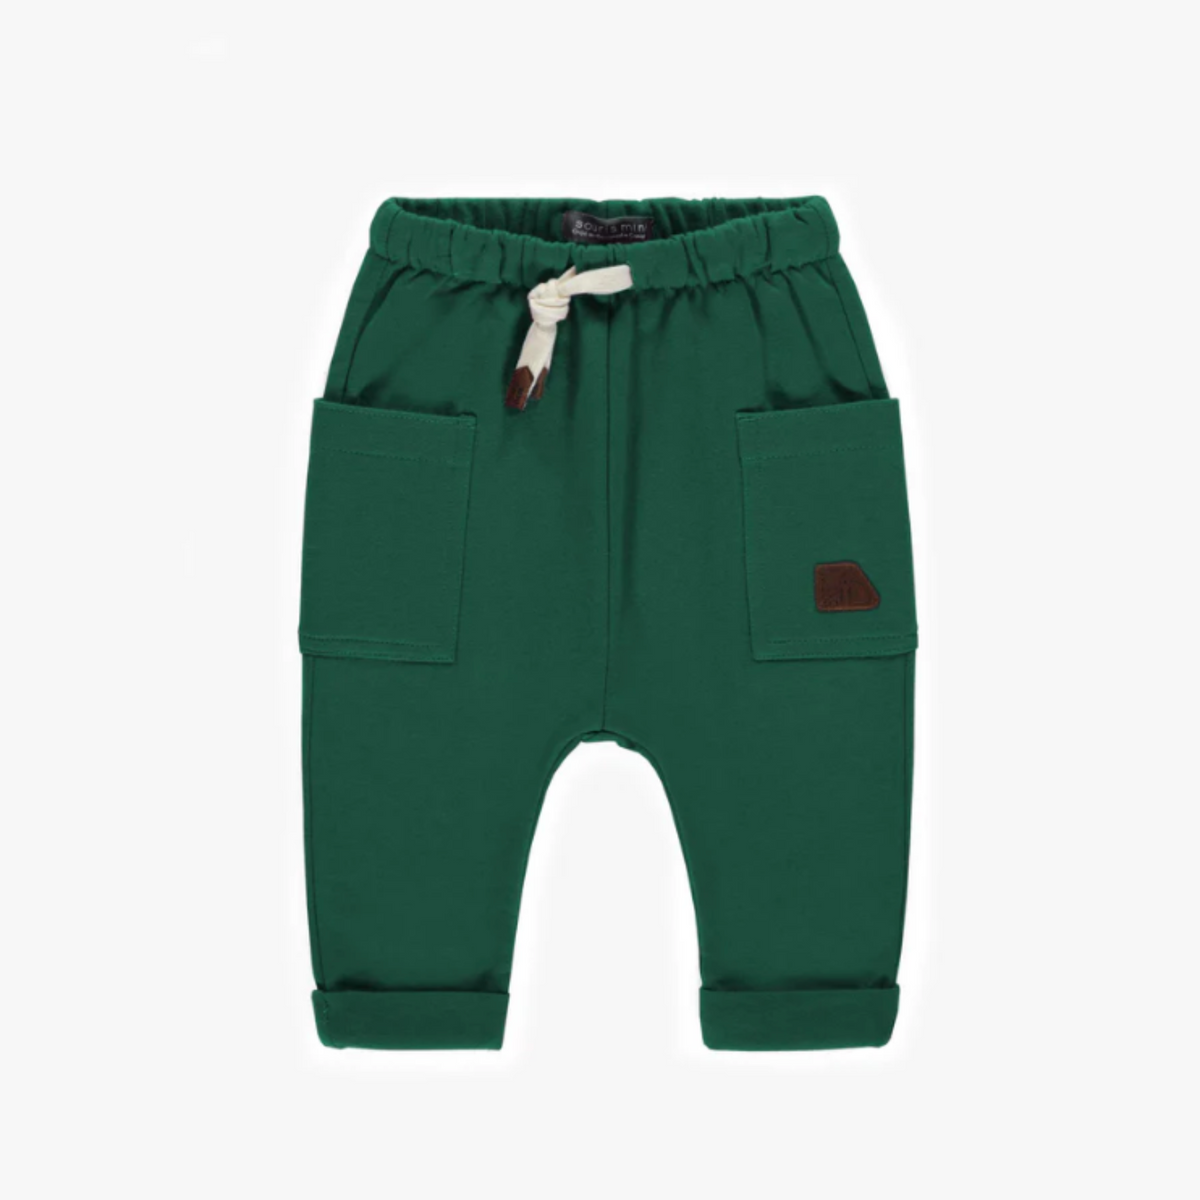 Green Casual Fit Pants in Cotton, Toddler